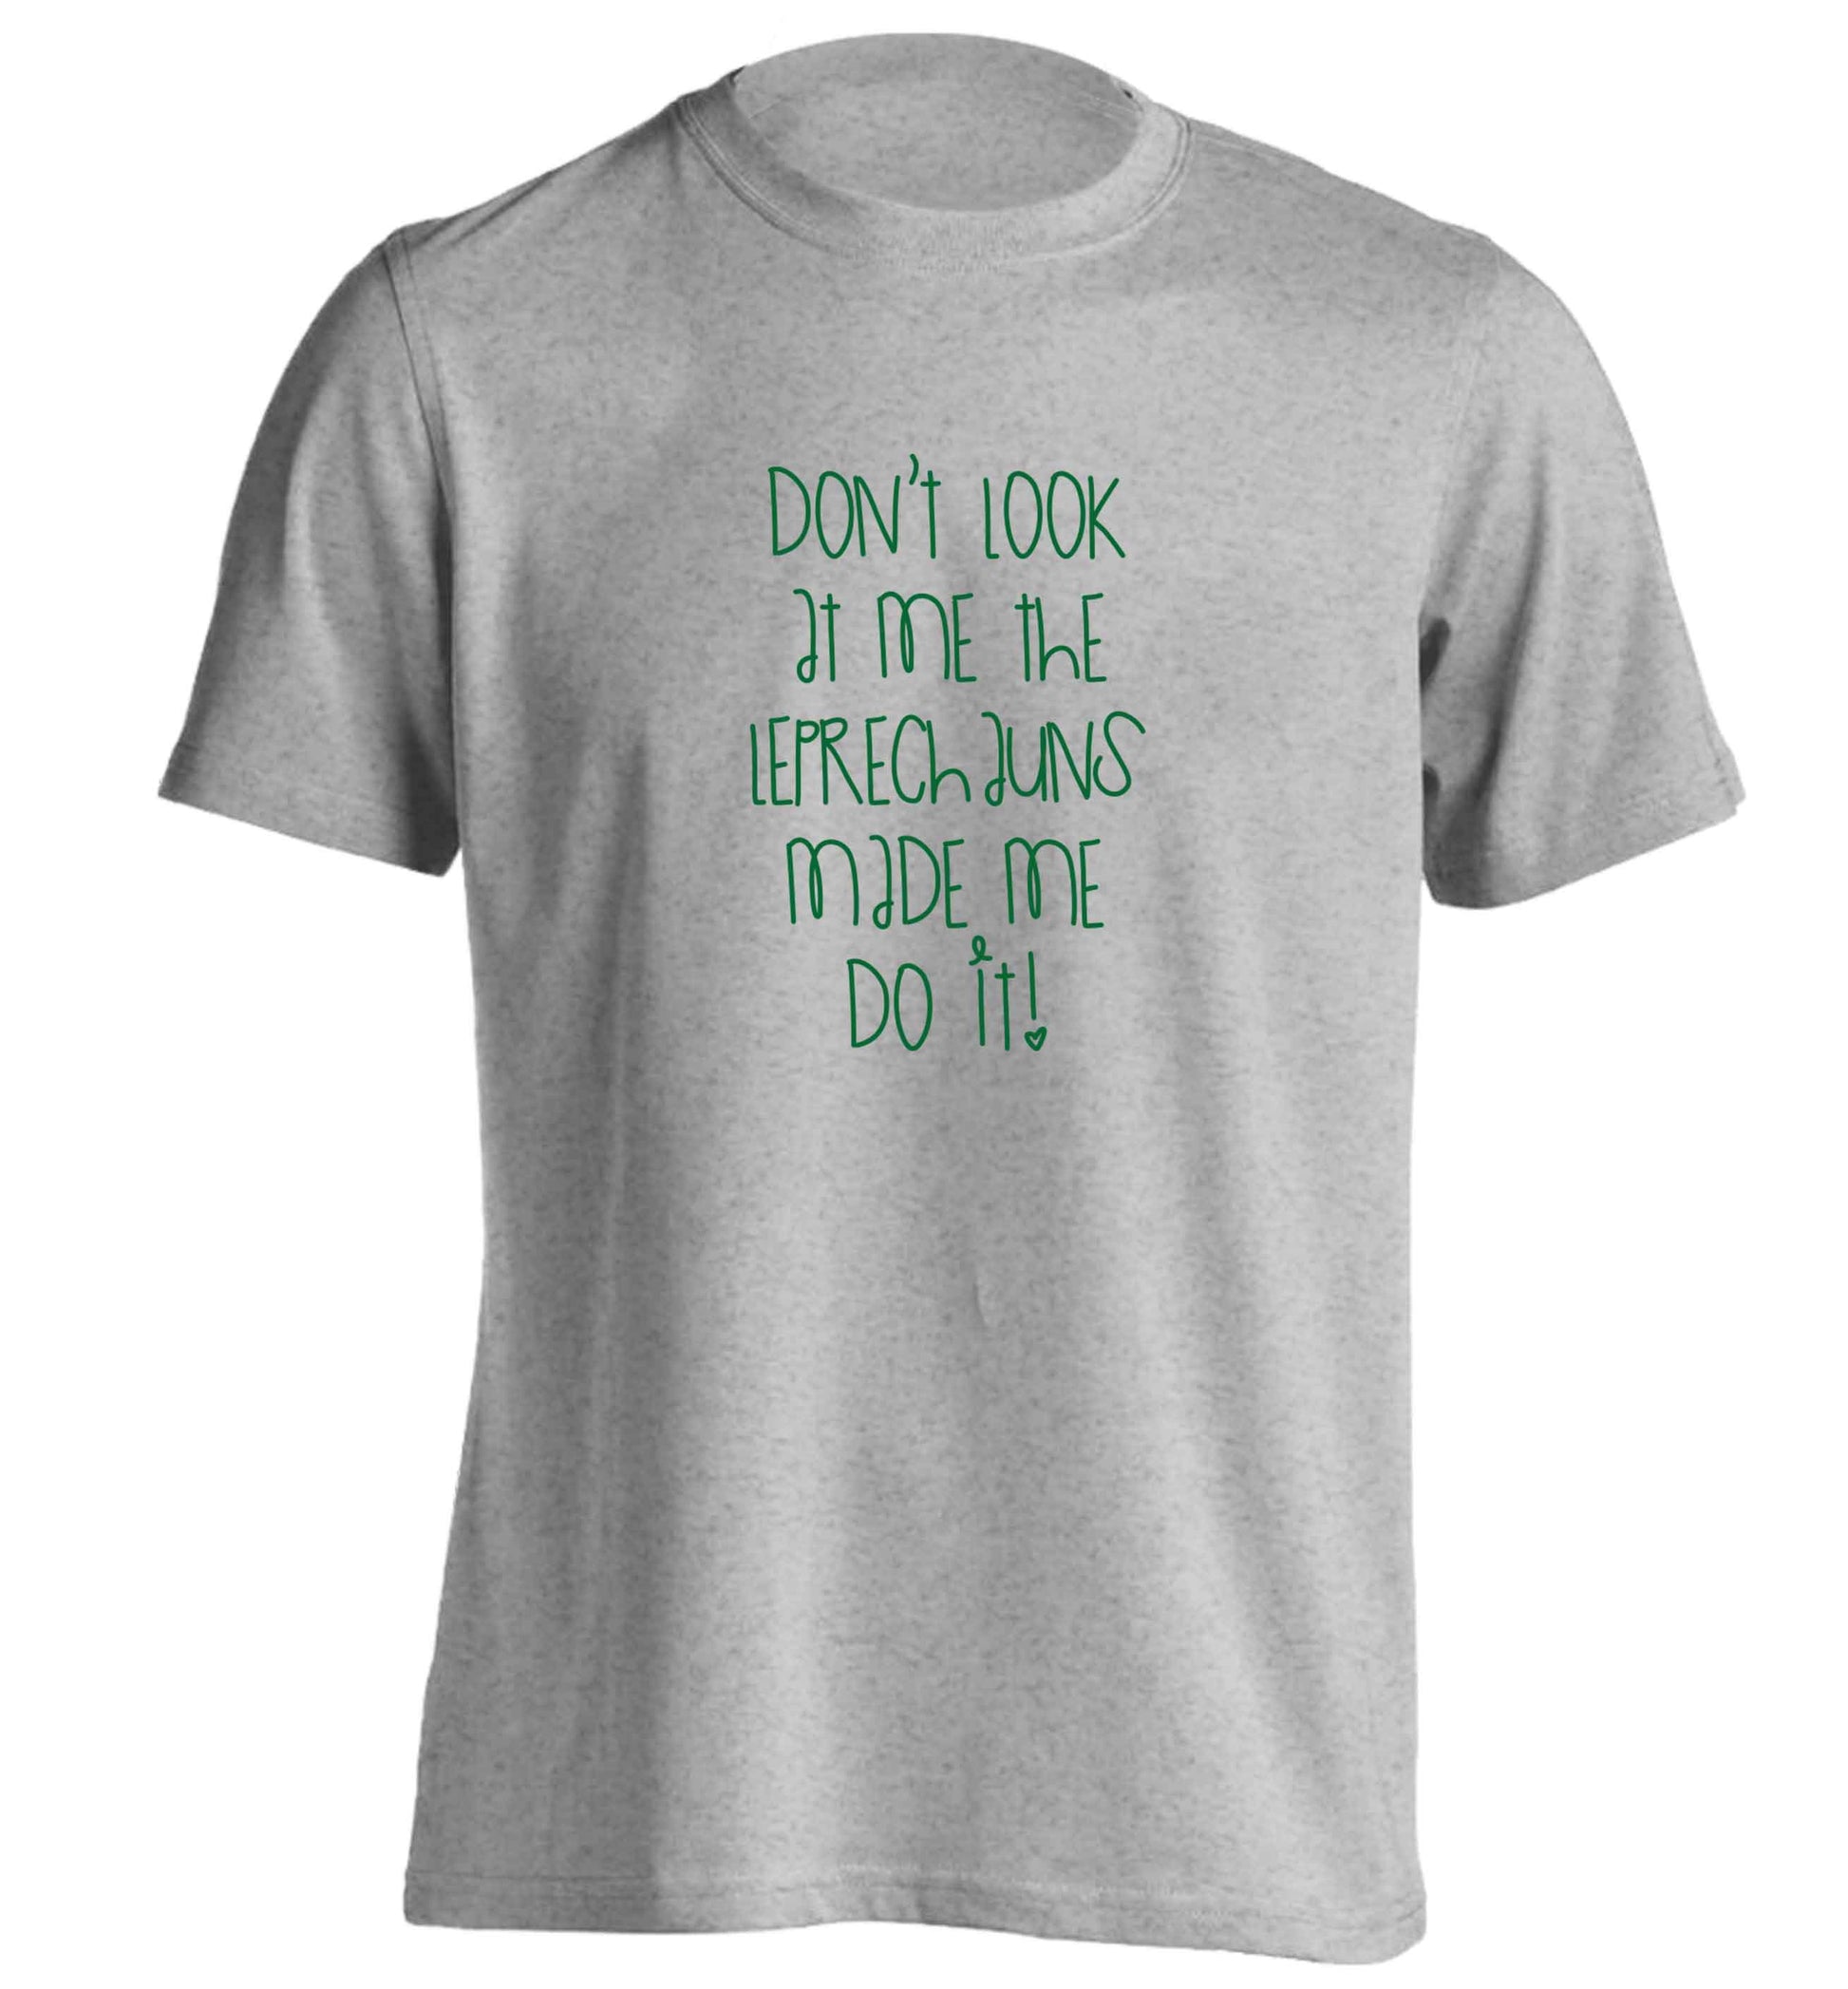 Don't look at me the leprechauns made me do it adults unisex grey Tshirt 2XL